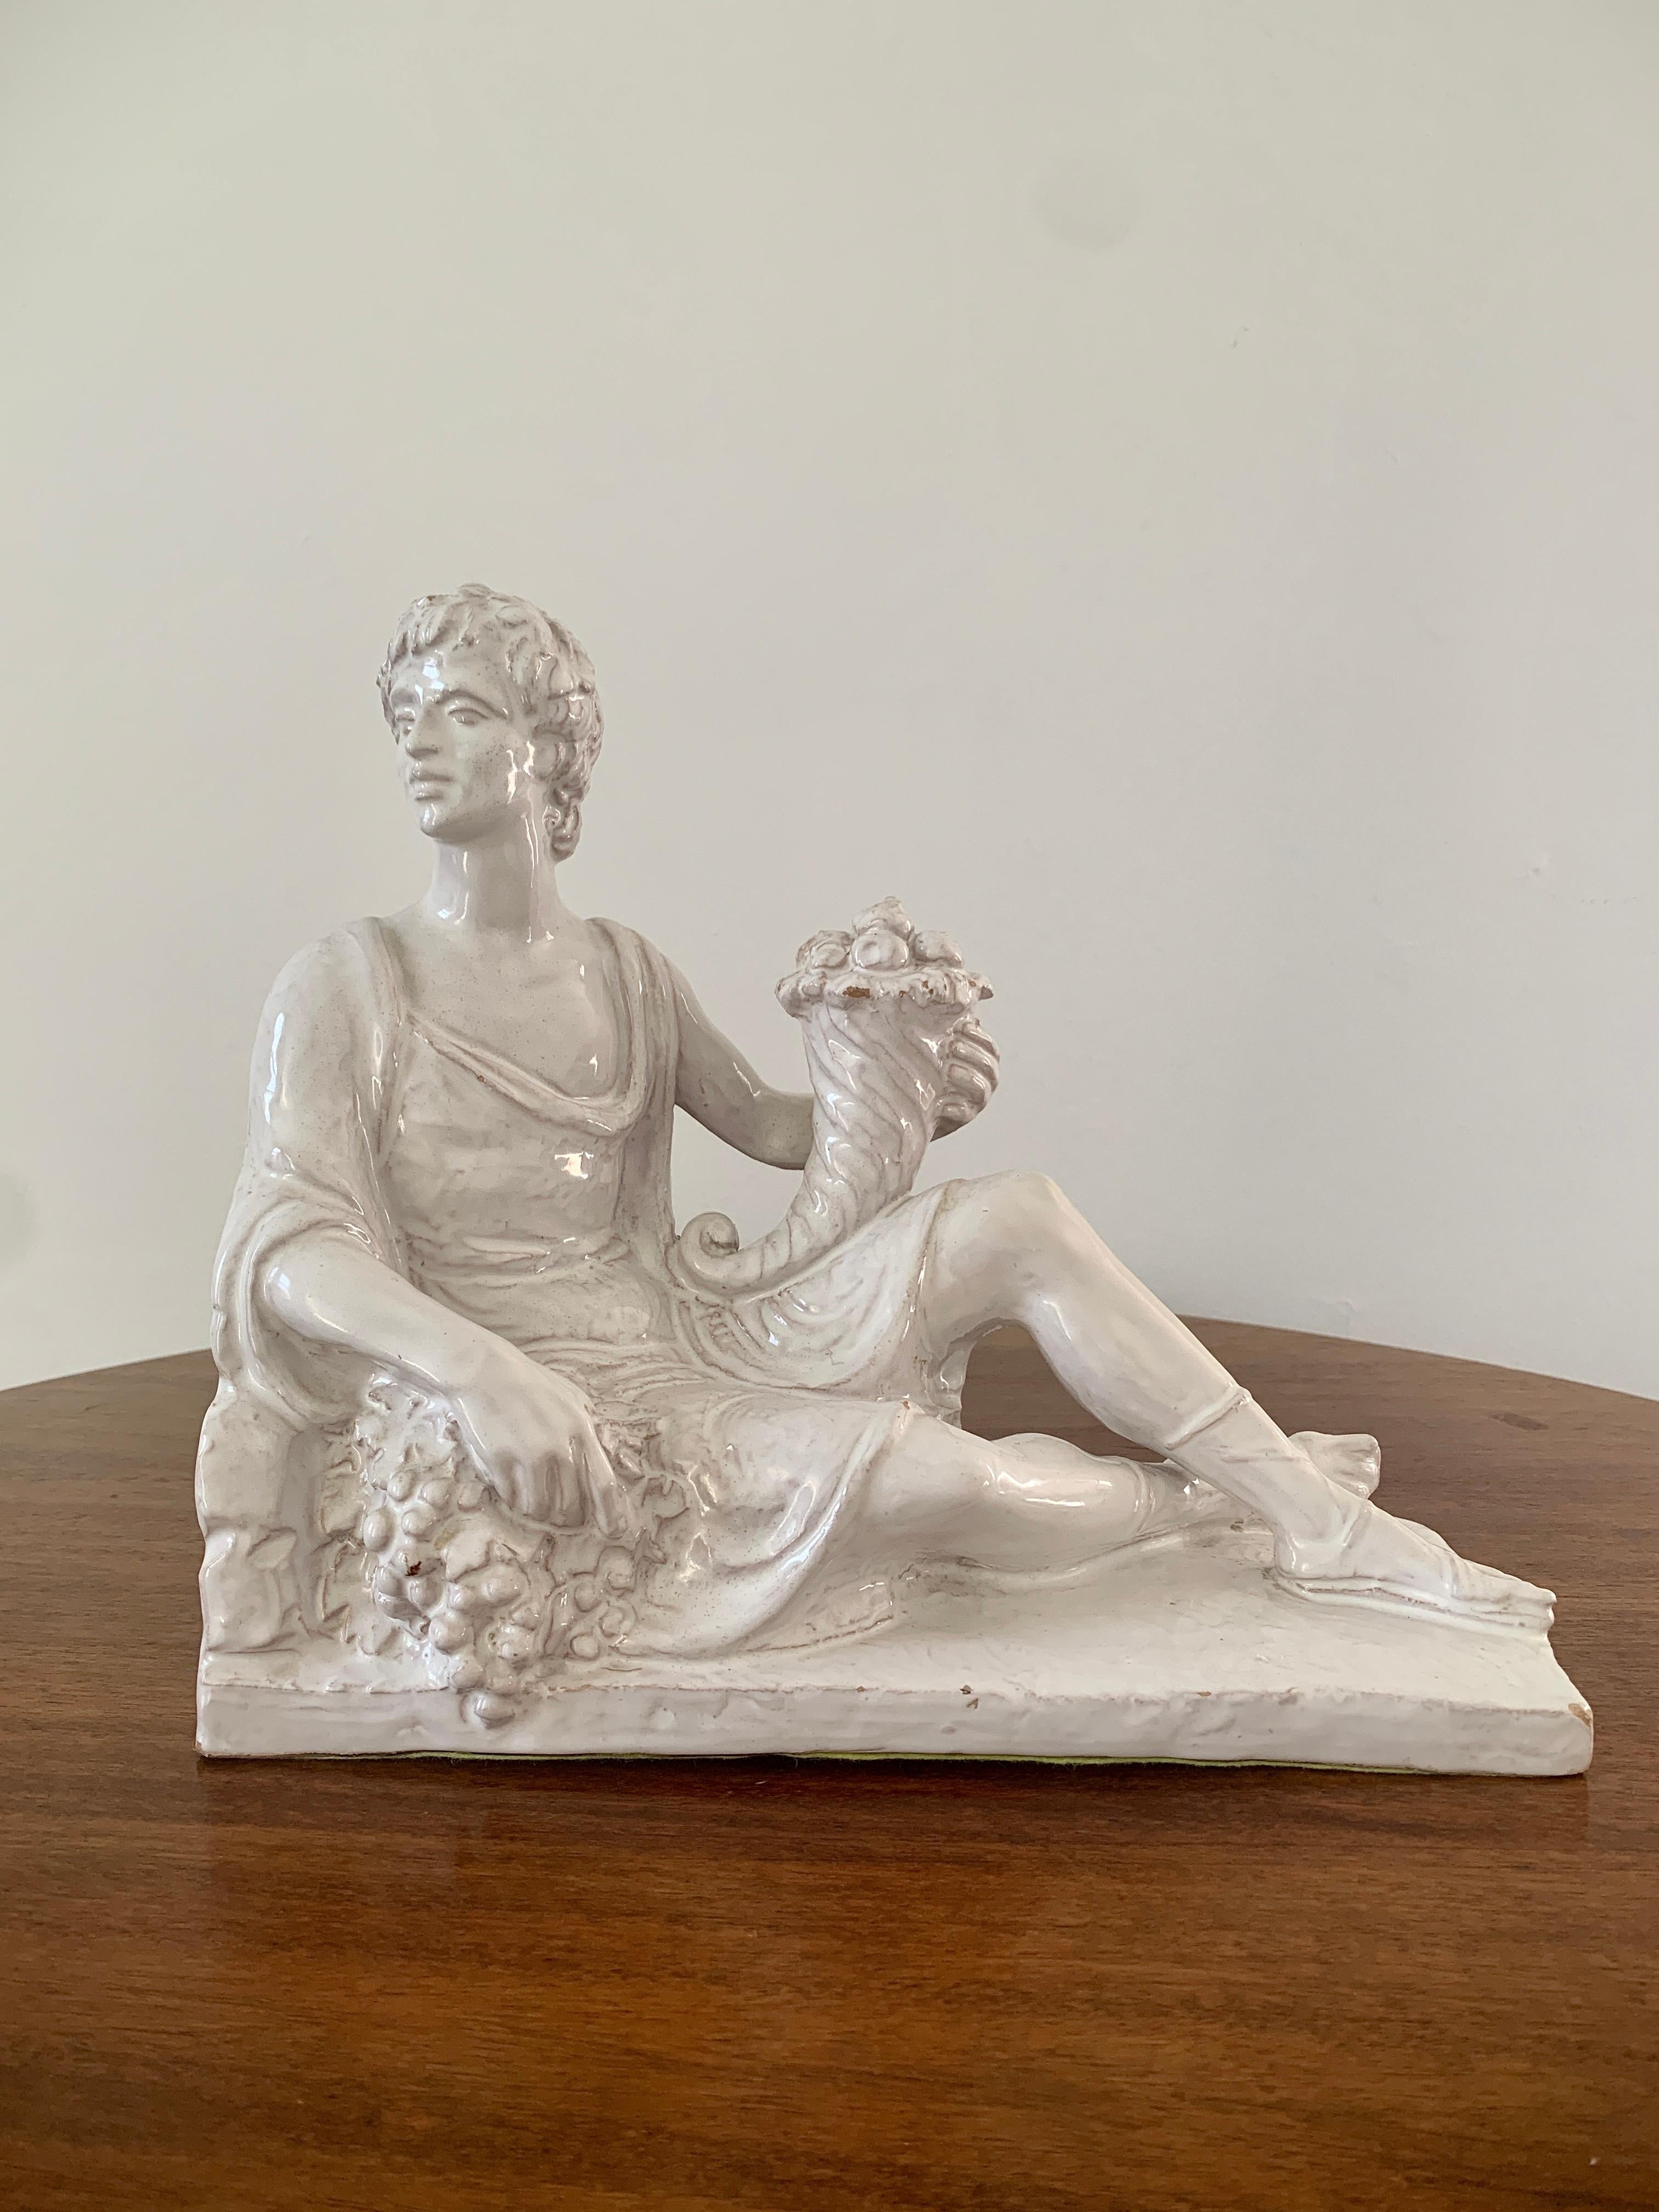 A gorgeous neoclassical style white porcelain sculpture of a reclining man holding a cornucopia

Italy, Circa 1960s

Measures: 11.25